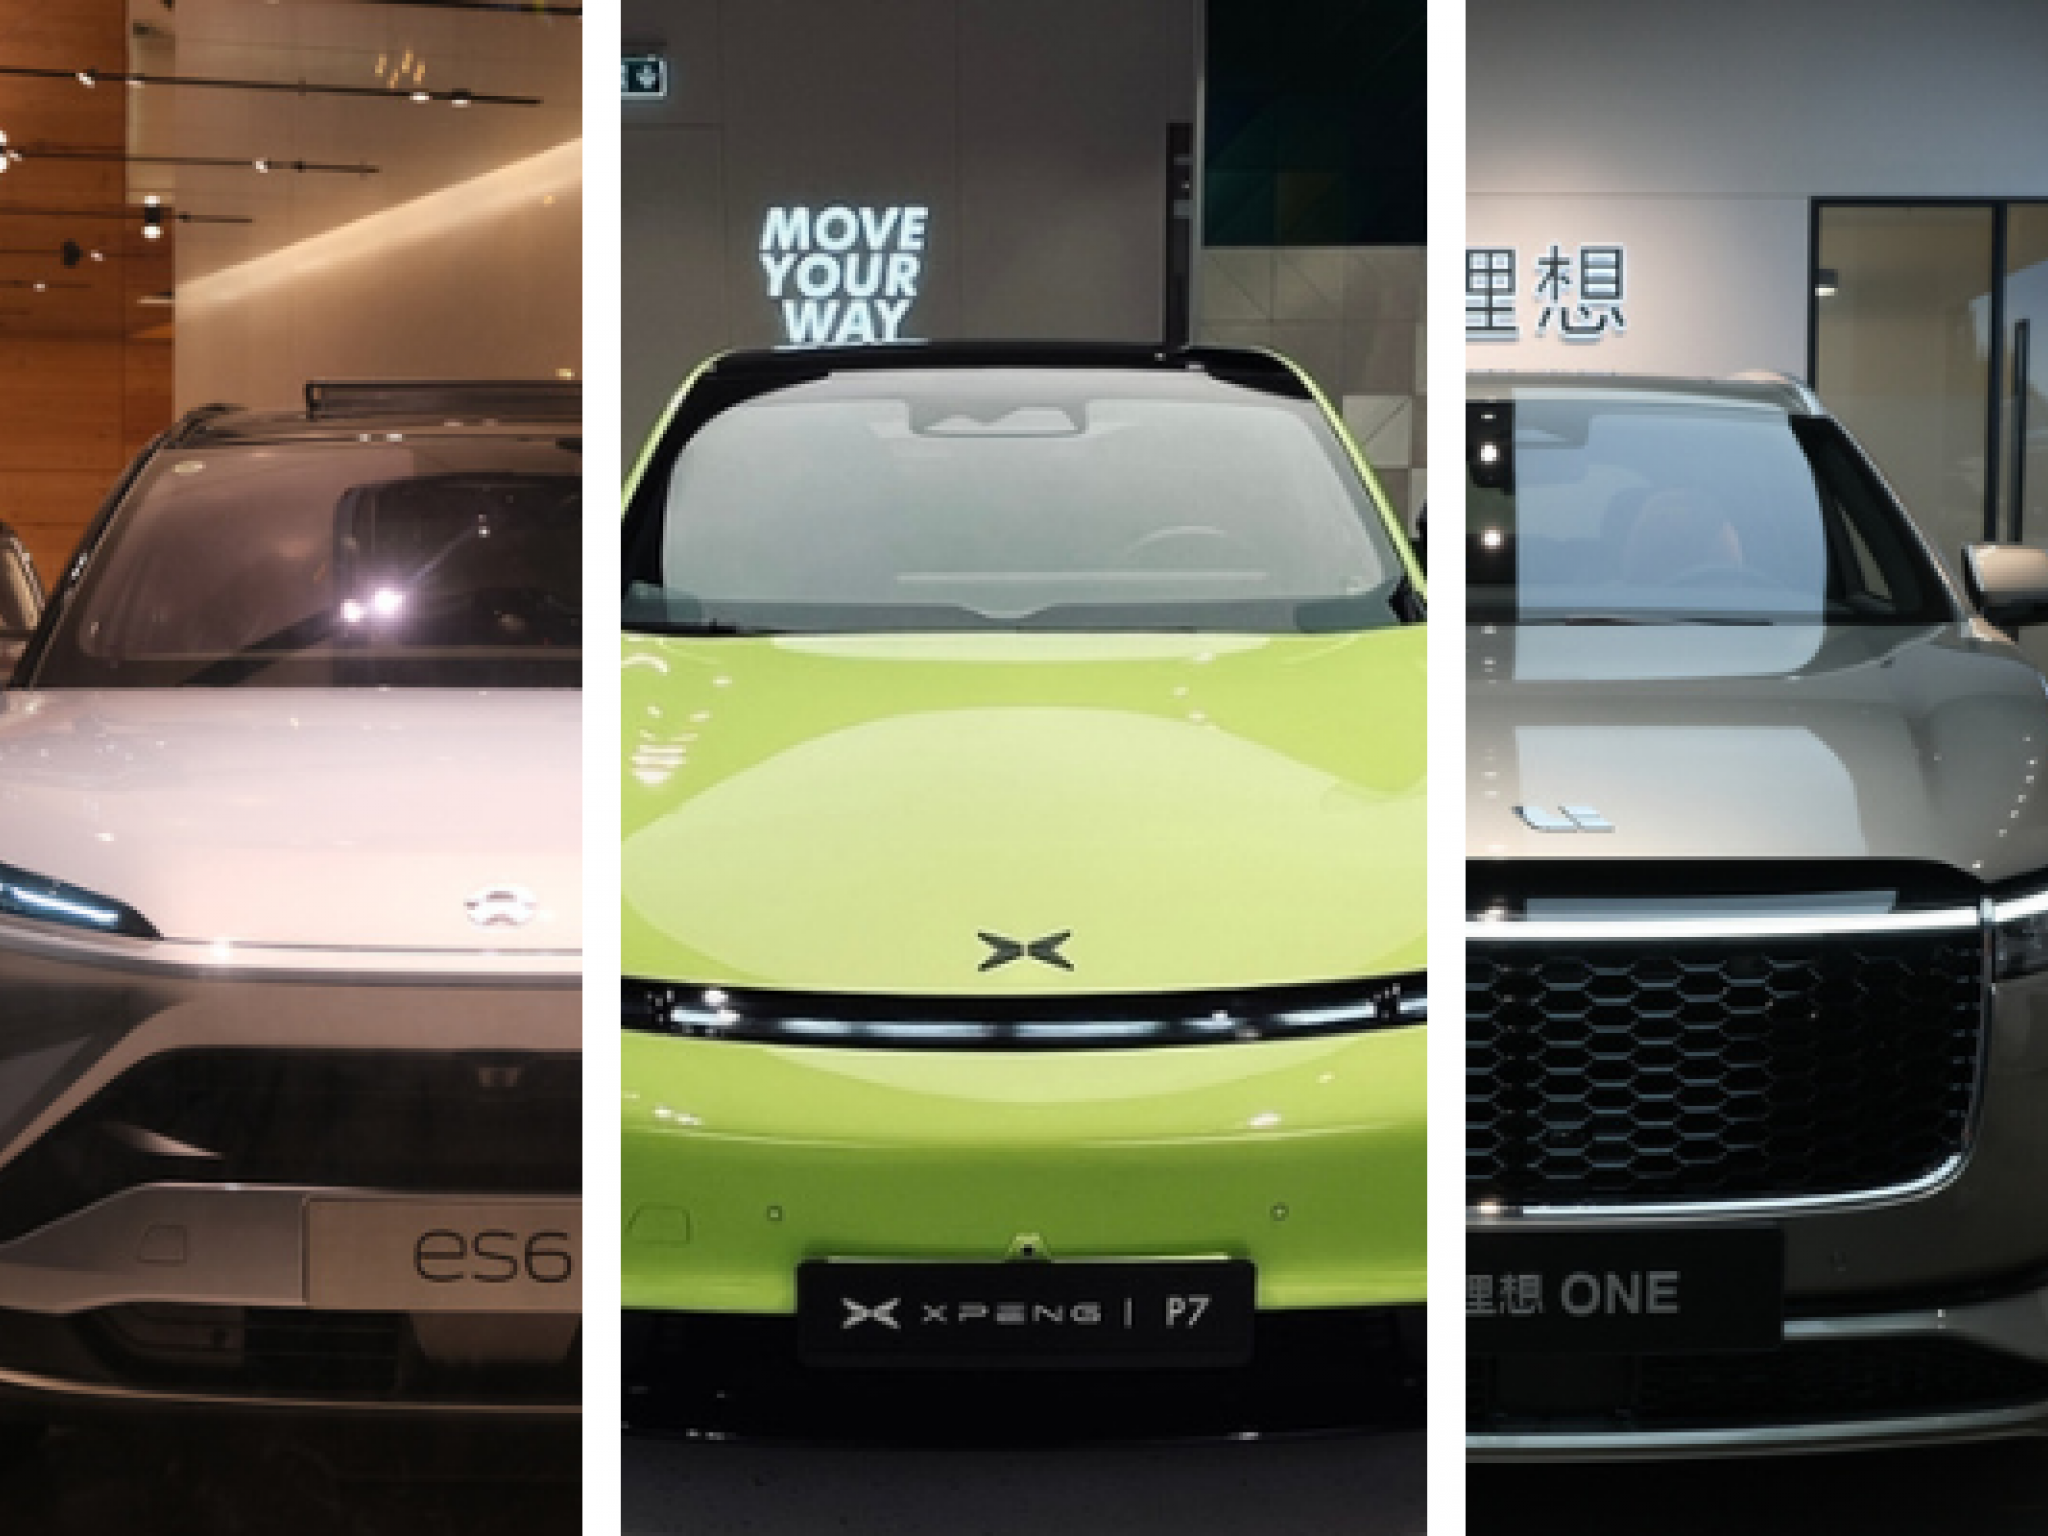  whats-going-on-with-chinese-ev-stocks-nio-li-auto-xpeng-on-wednesday 